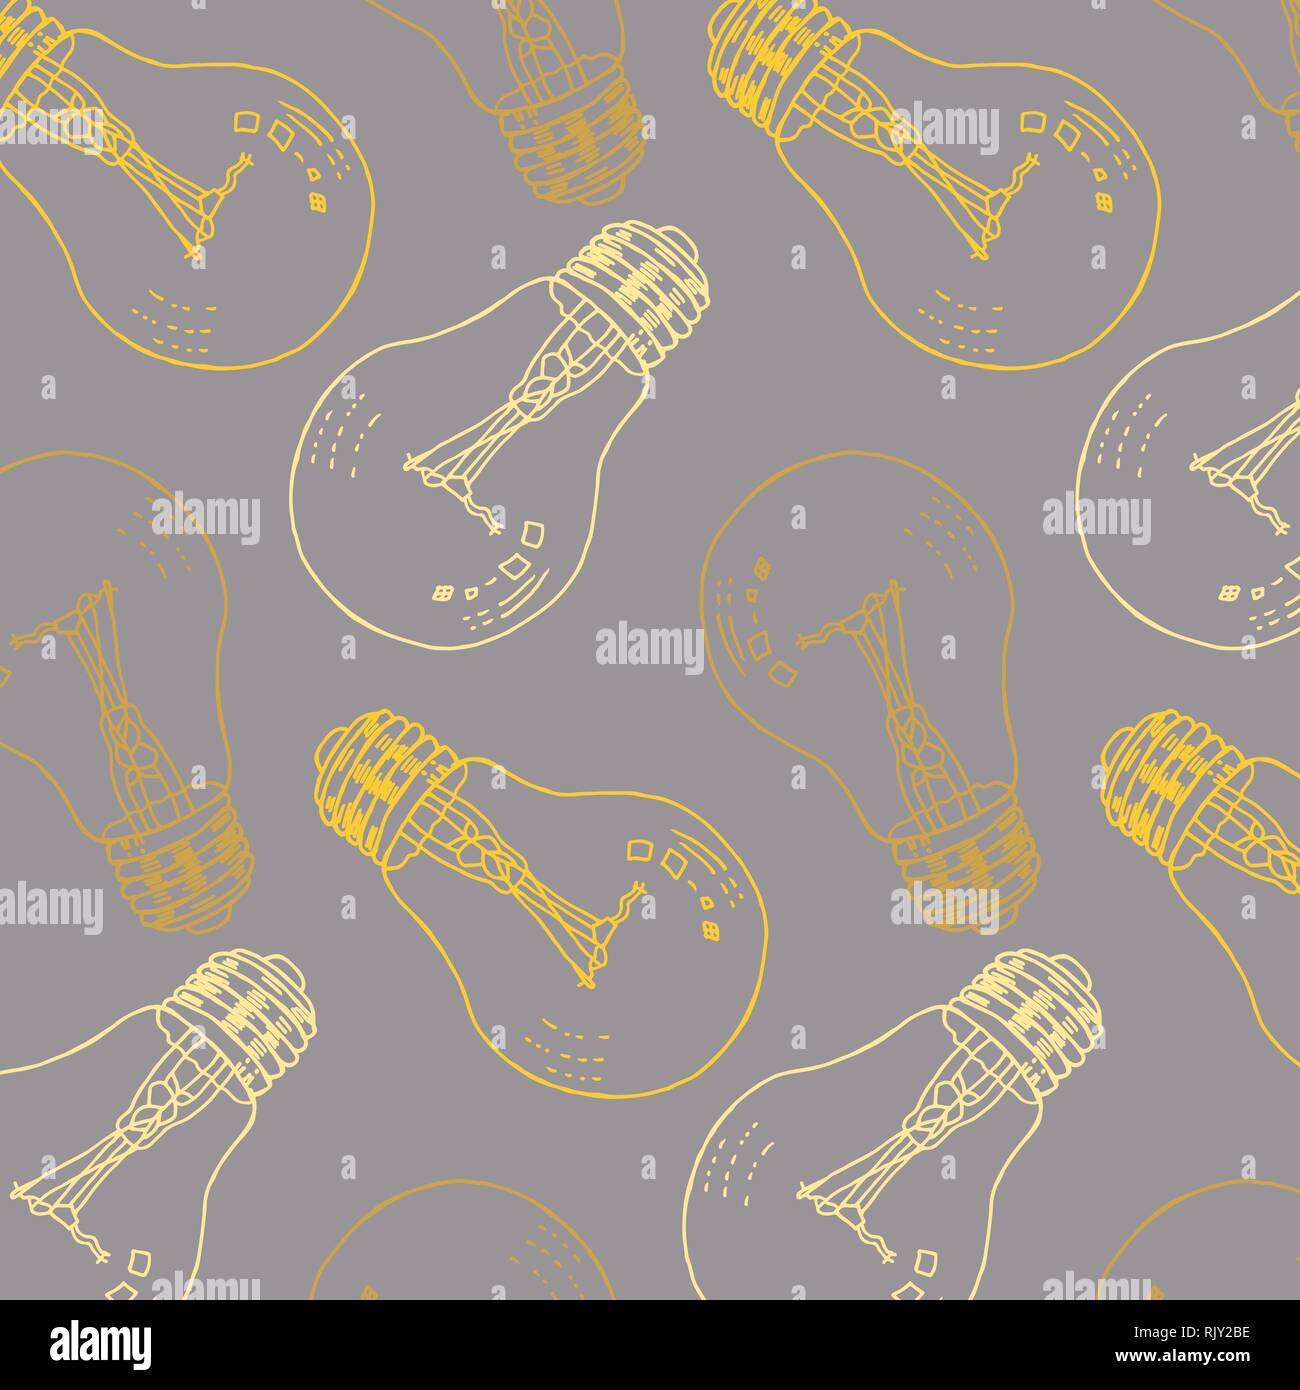 Hand drawn light bulbs vector pattern (idea symbol) in yellow and gray colors palette Stock Vector